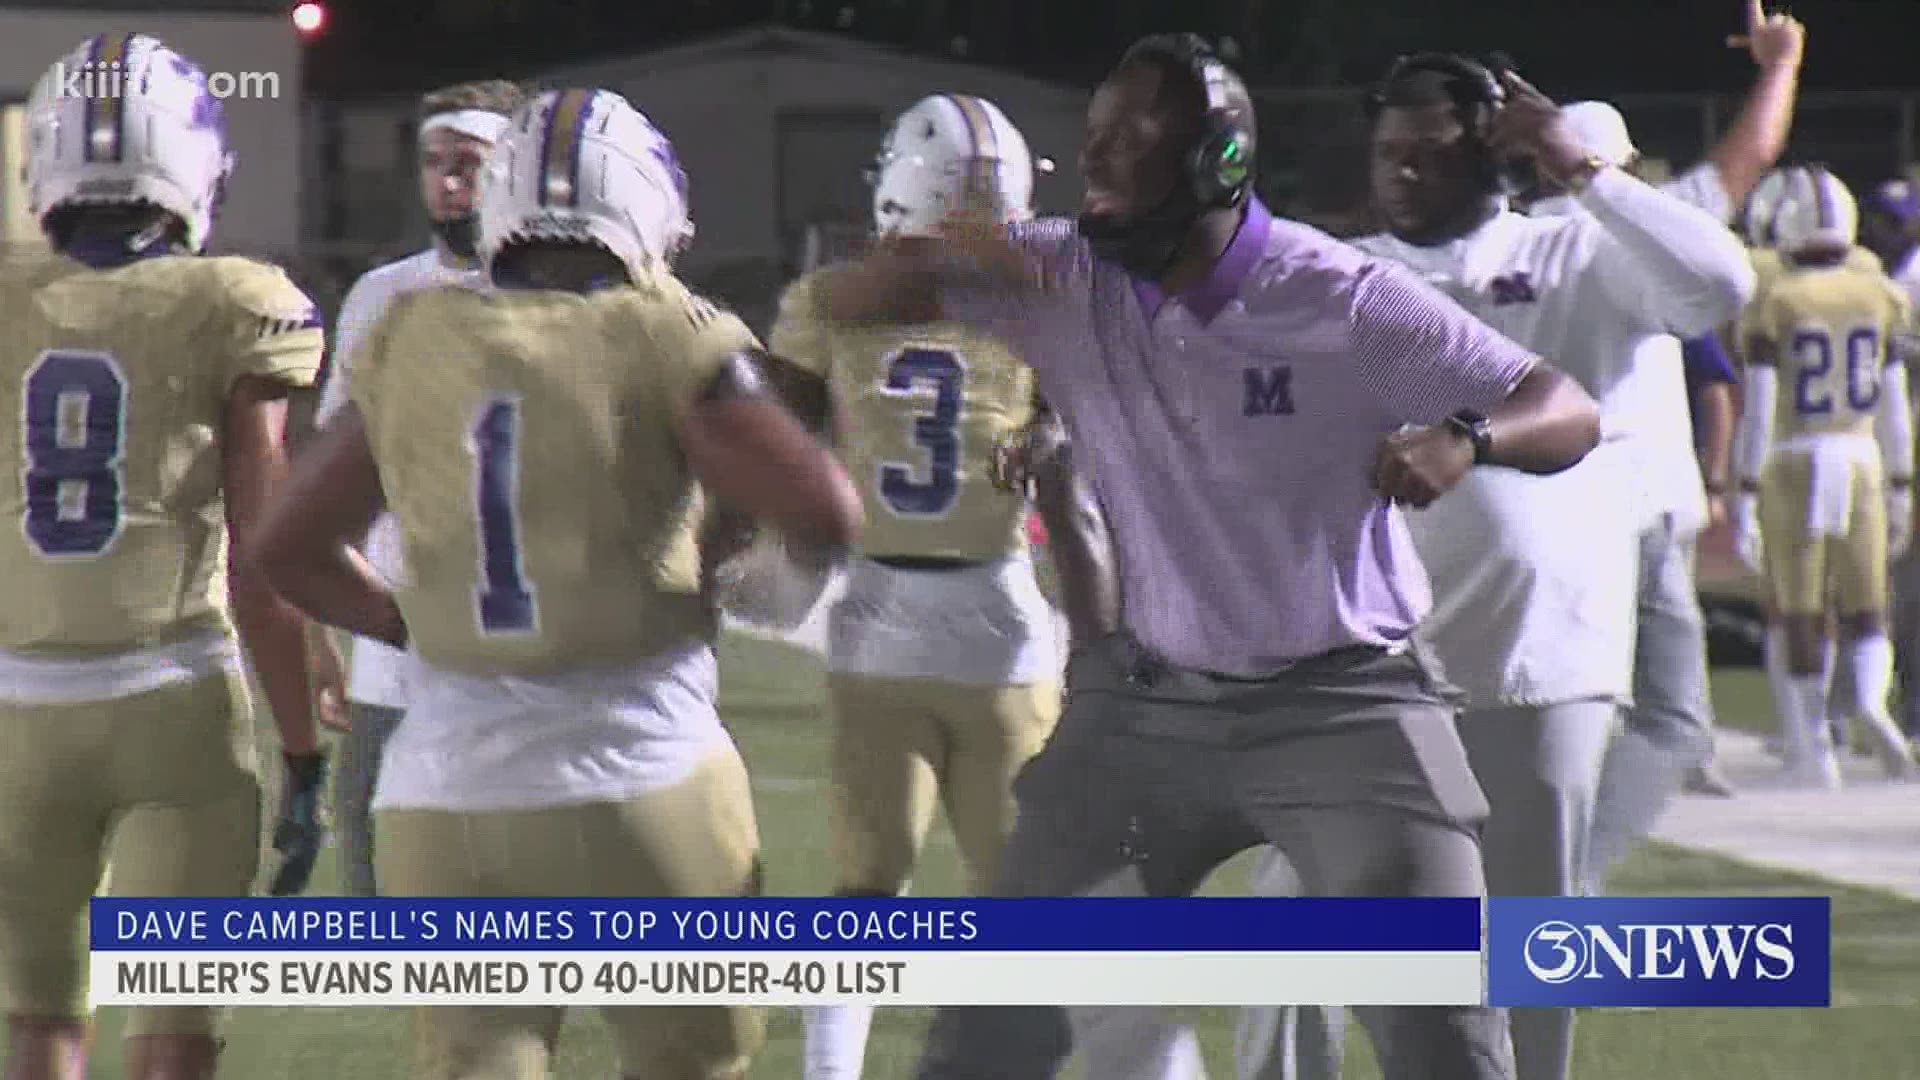 Dave Campbell's Texas Football named Justen Evans to their 40-under-40 list, recognizing some of the state of Texas's best young up-and-coming coaches.